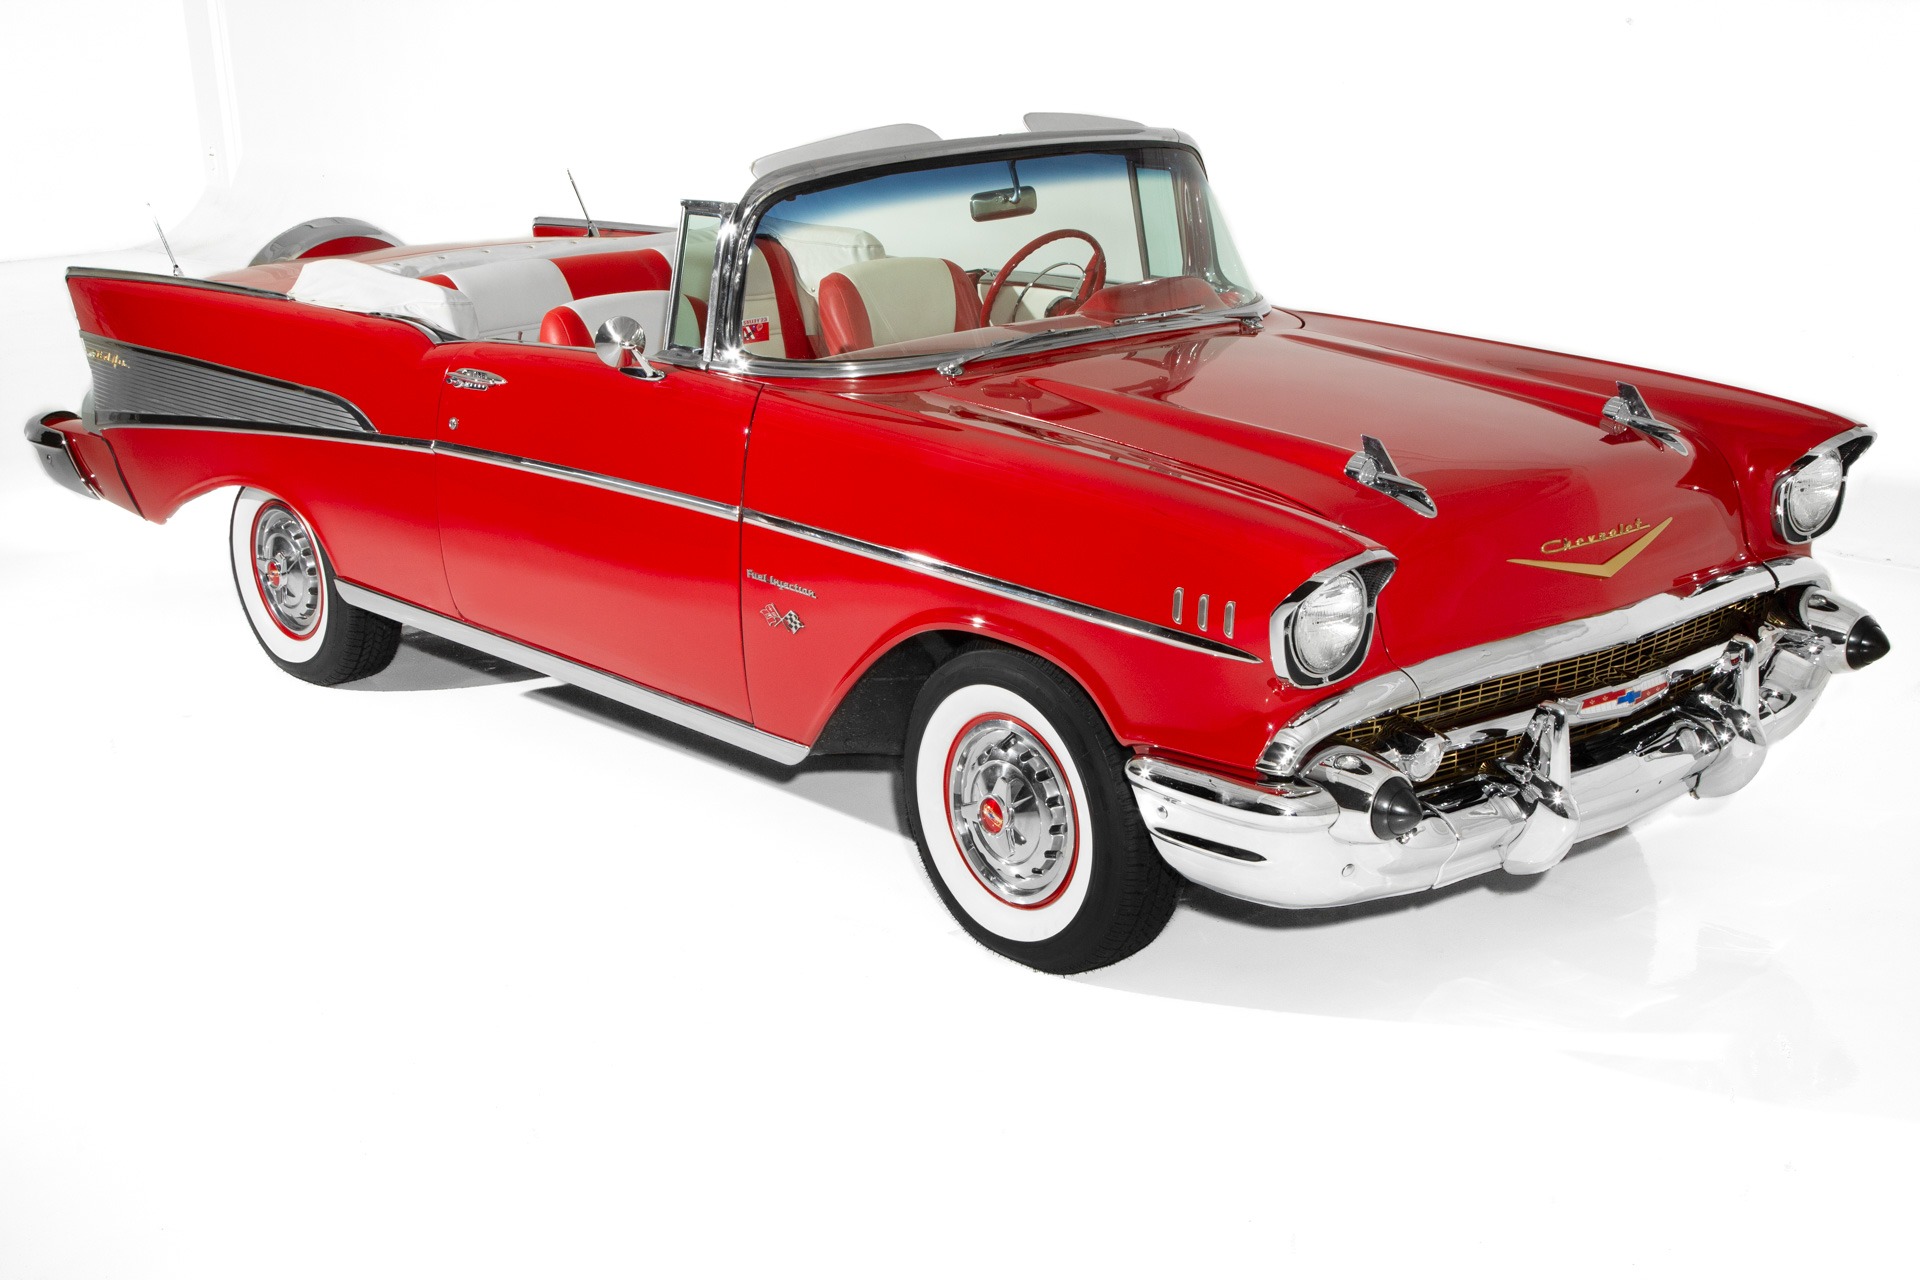 For Sale Used 1957 Chevrolet Bel Air LT1 Auto AC Cont. Kit | American Dream Machines Des Moines IA 50309